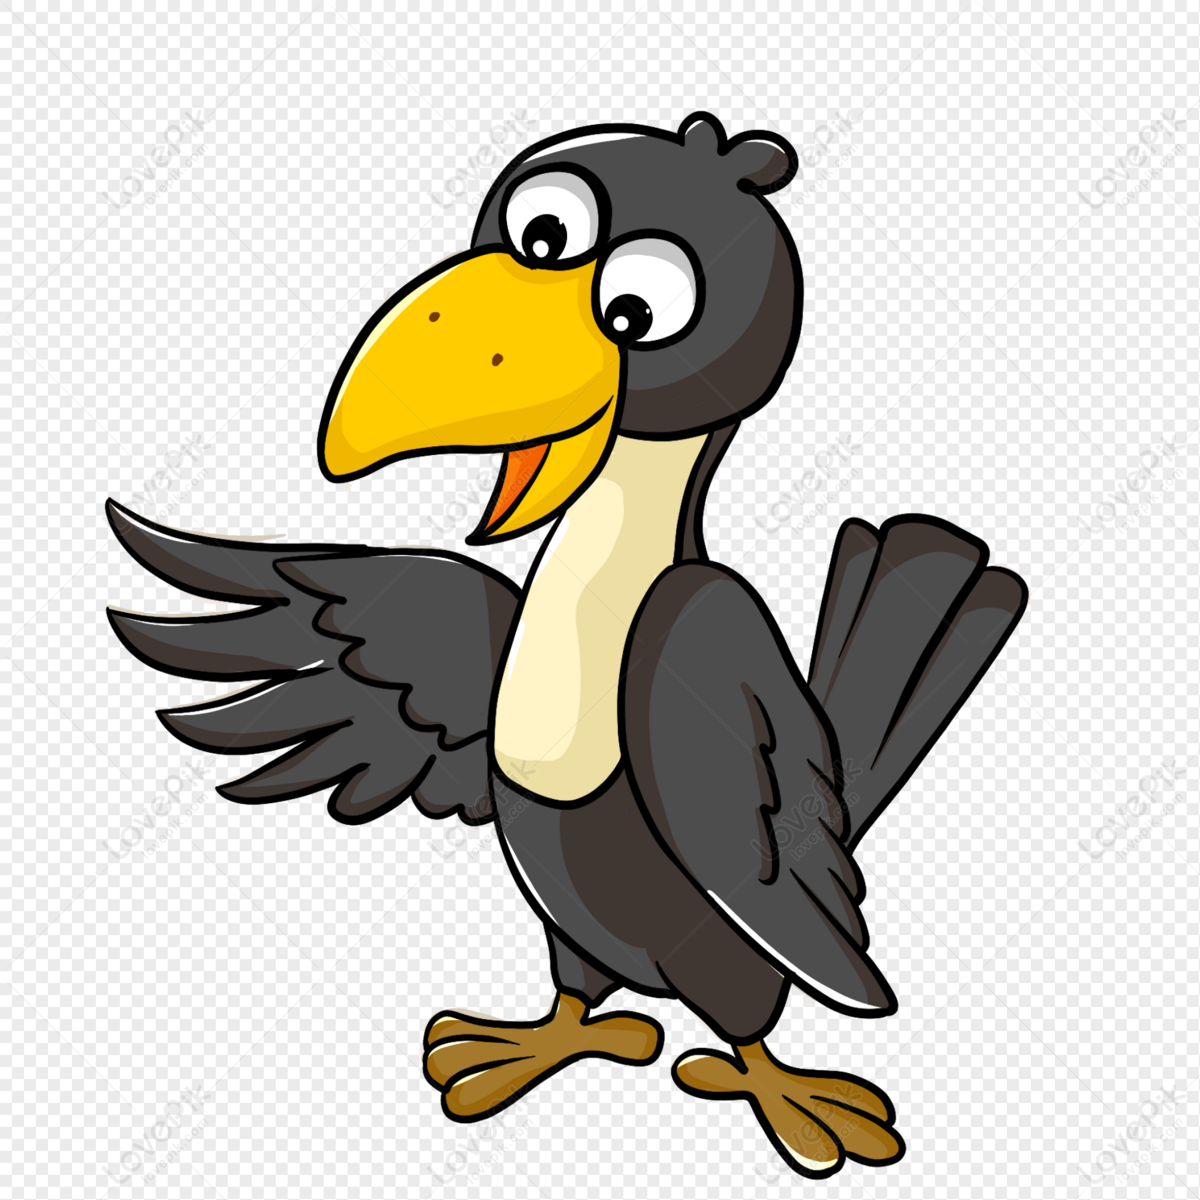 Small Animal Crow PNG Transparent Background And Clipart Image For Free  Download - Lovepik | 401528390